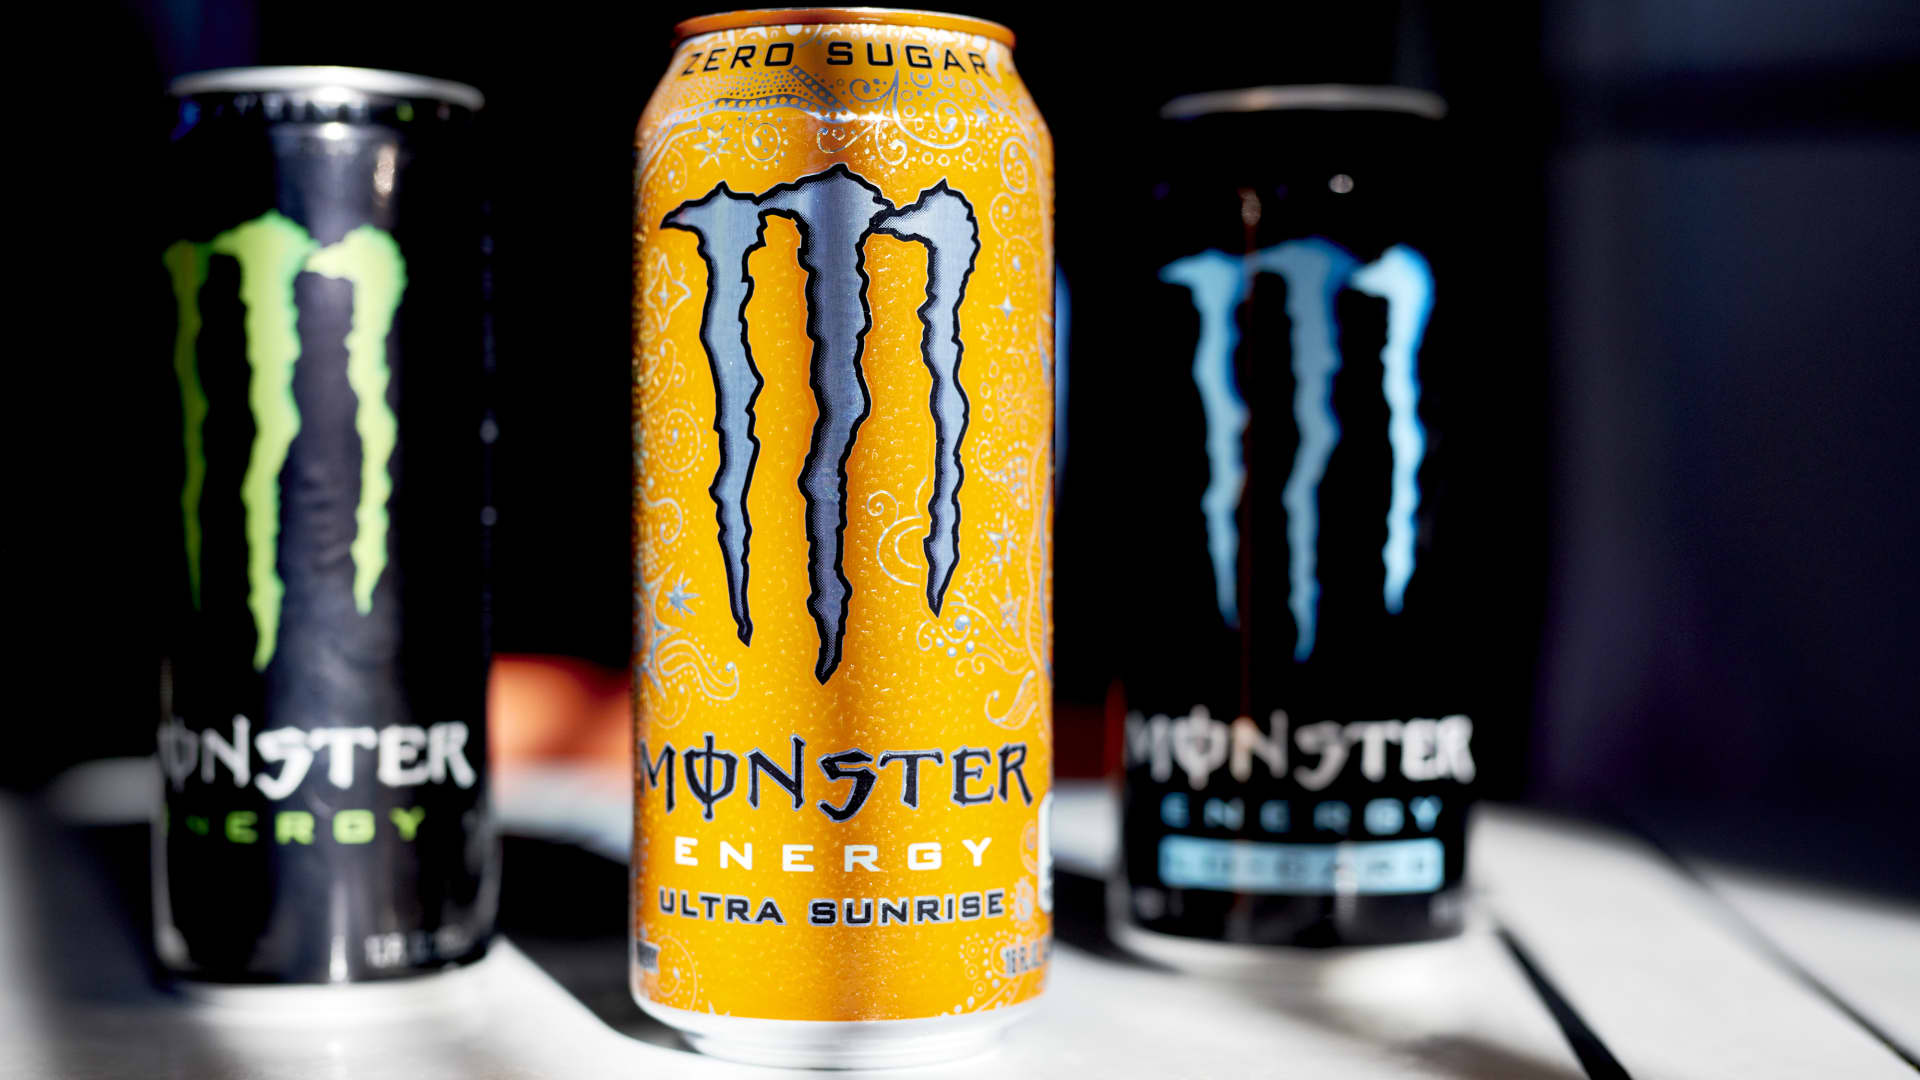 This energy drink stock can rally more than 20% and overtake Red Bull in the U.S., HSBC says